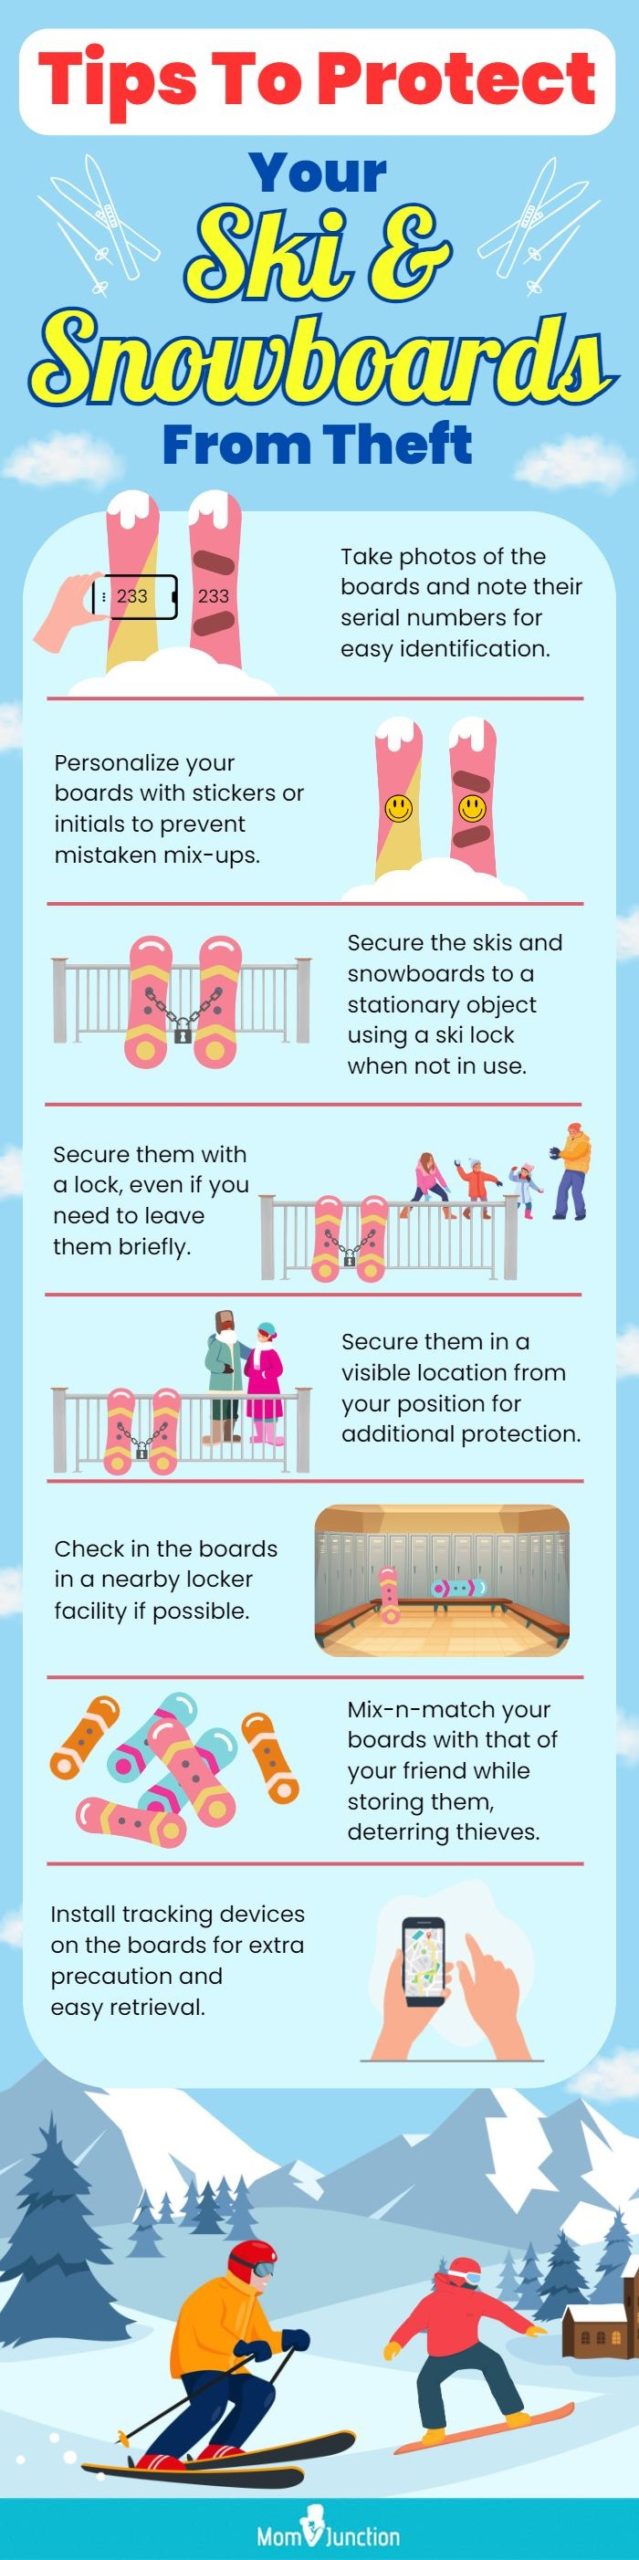 Tips To Protect Your Ski And Snowboards From Theft (infographic)